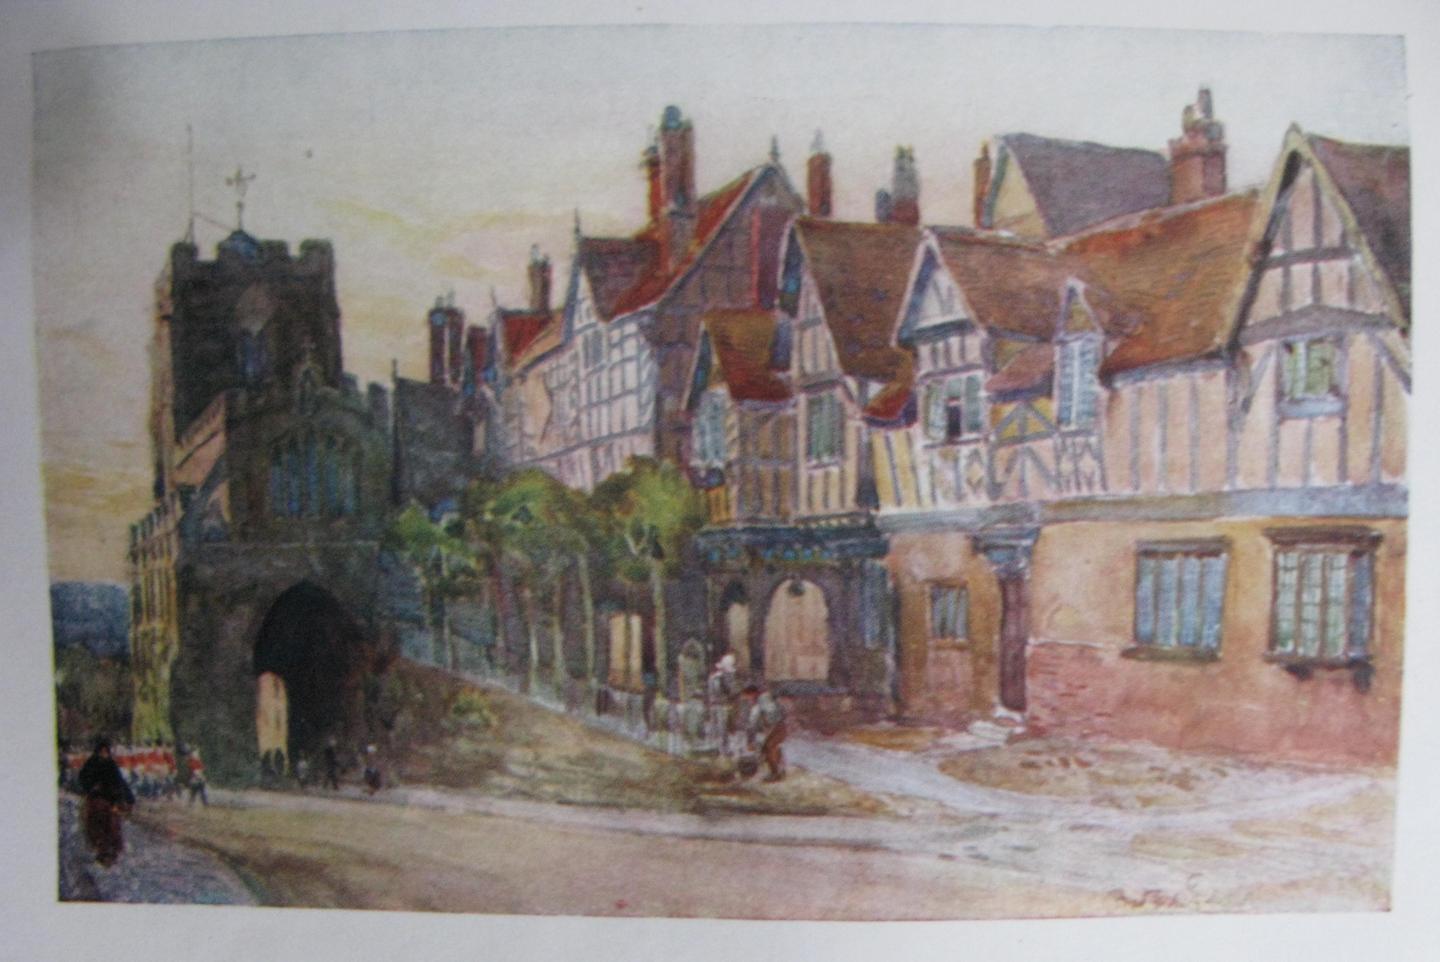 Holland, Clive and Whitehead, Fred (paintings) - Warwickshire